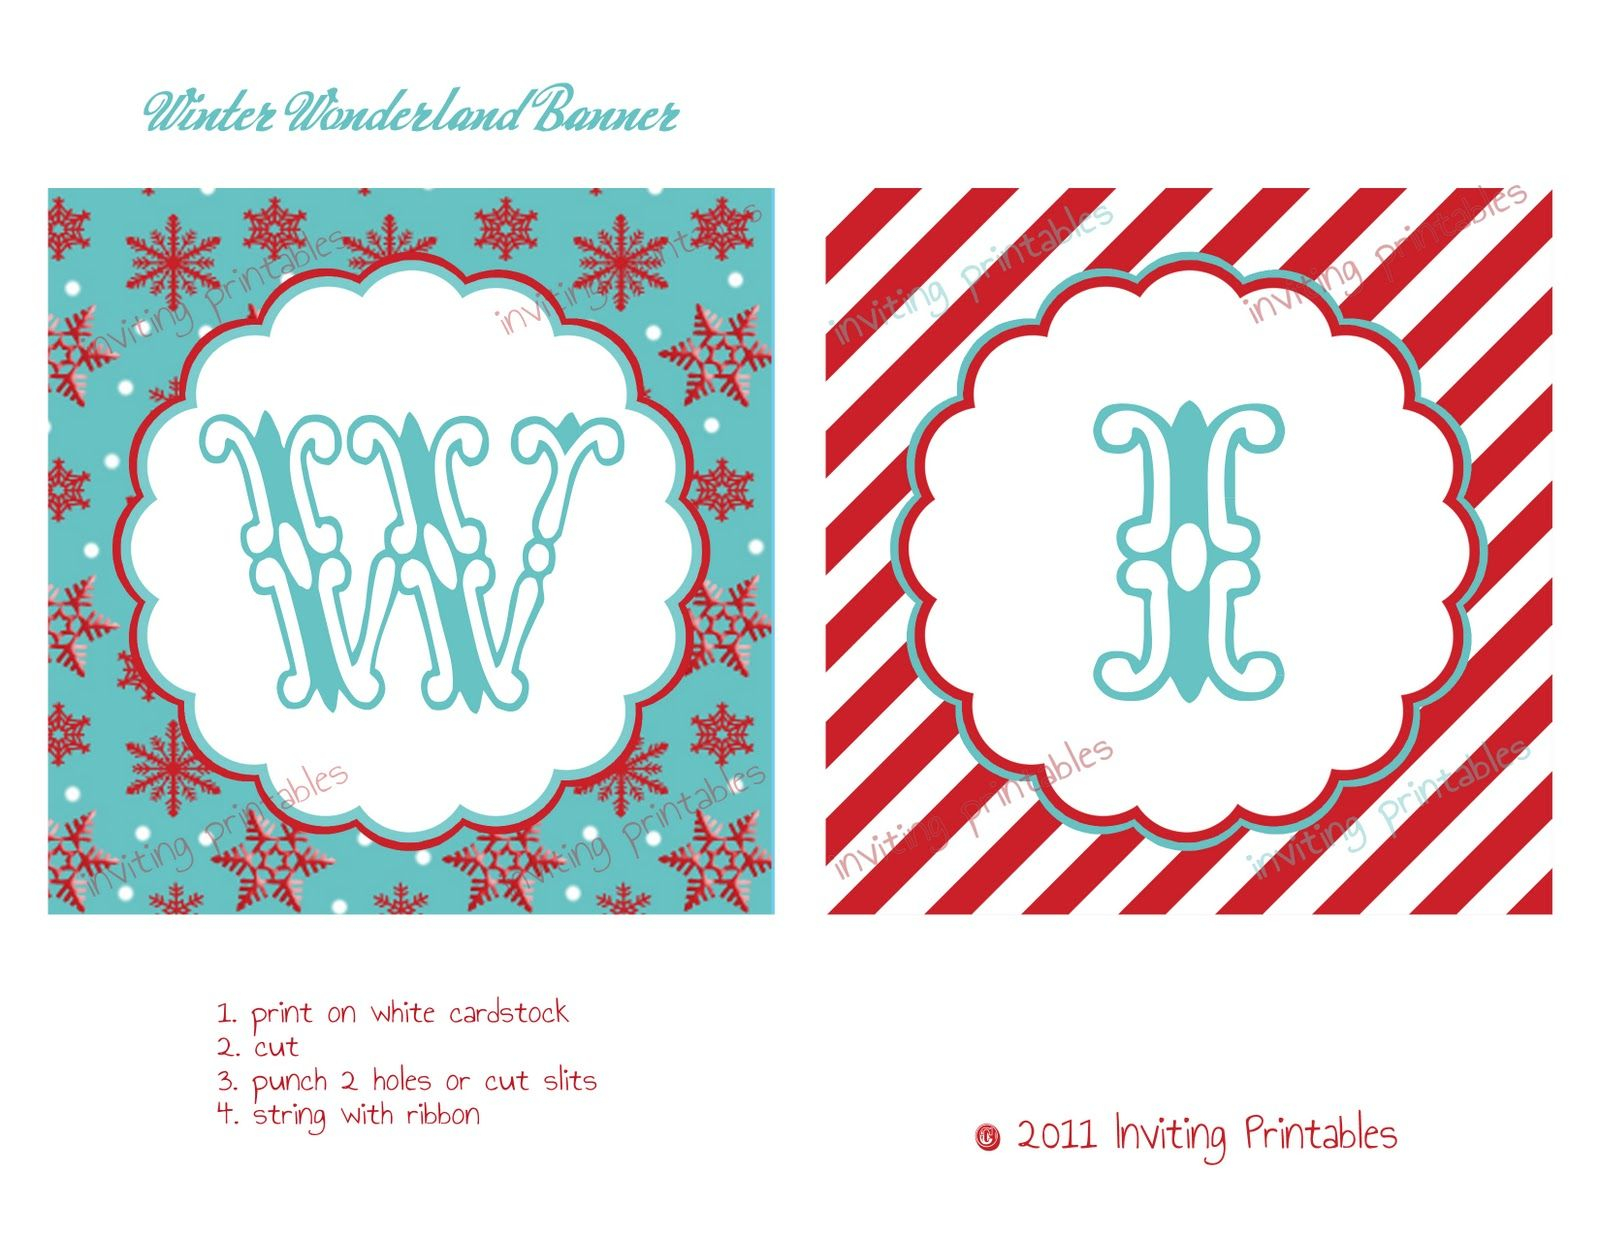 Printable Banners Templates Free Inviting Printables Winter with size 1600 X 1236